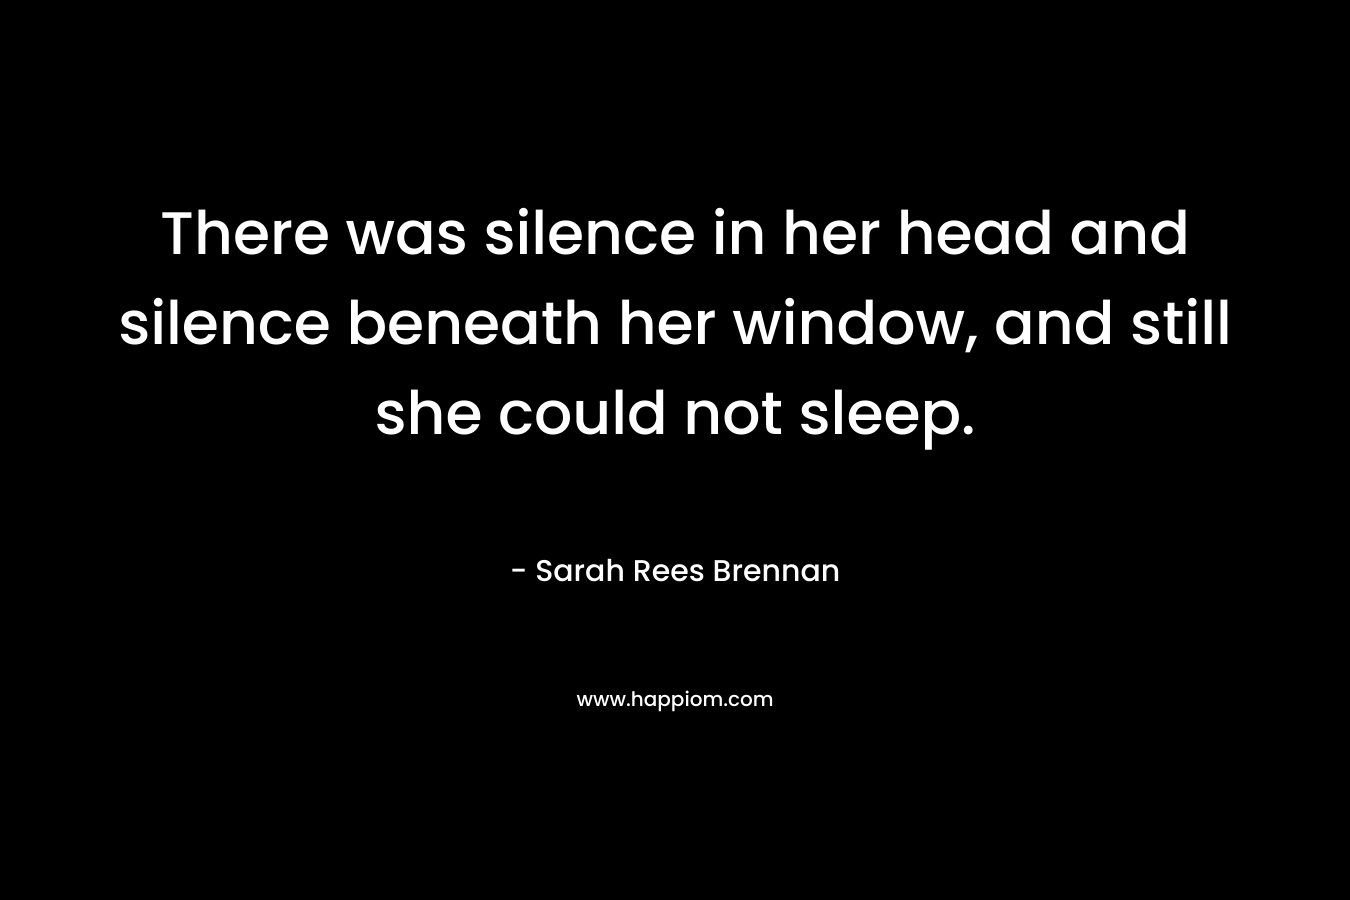 There was silence in her head and silence beneath her window, and still she could not sleep.